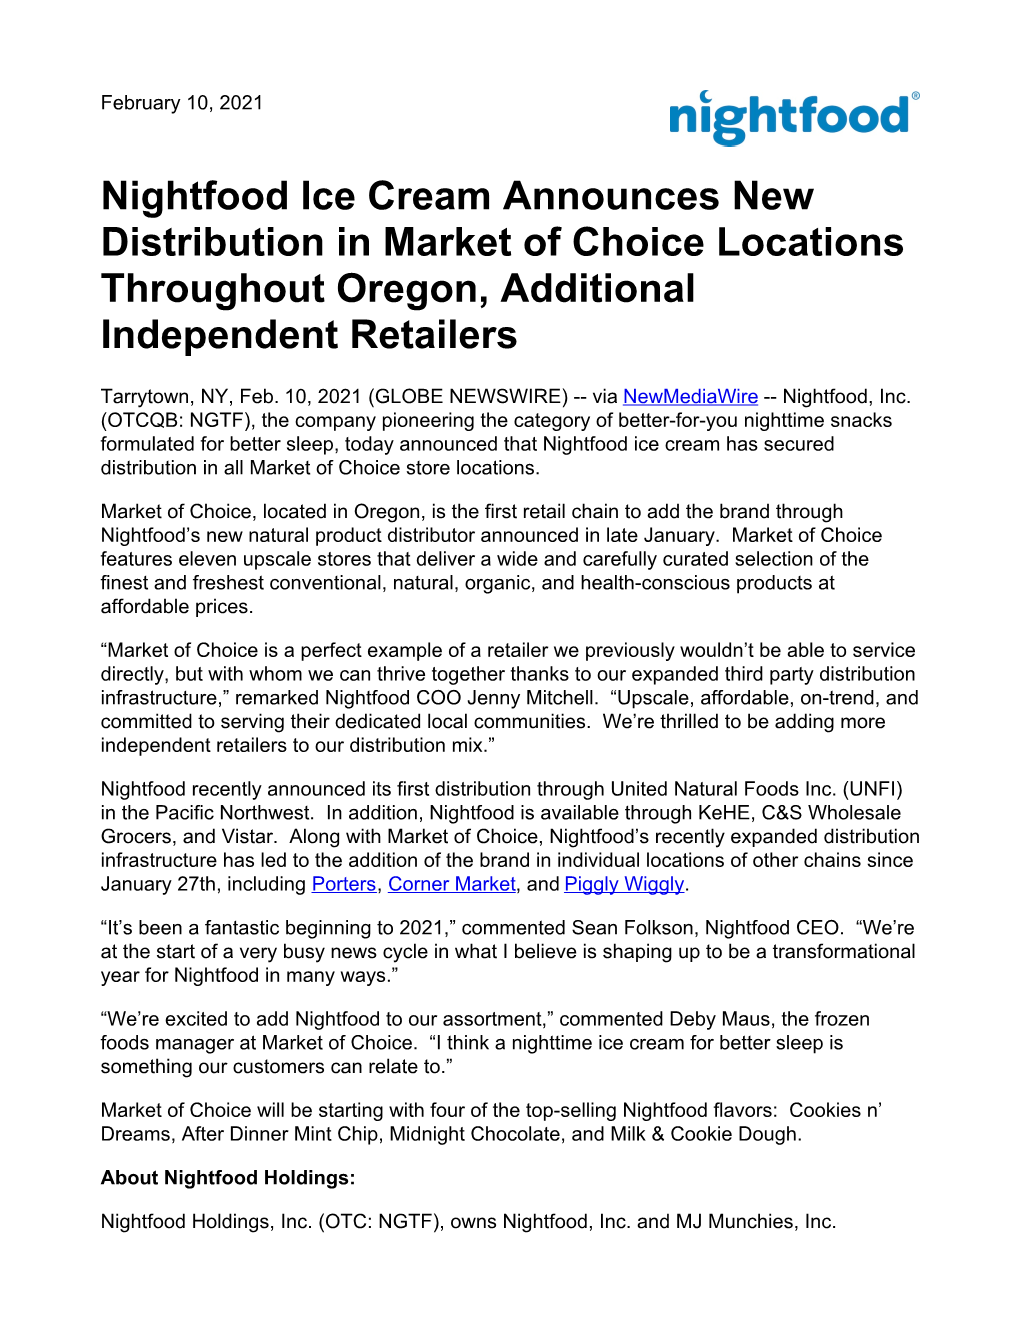 Nightfood Ice Cream Announces New Distribution in Market of Choice Locations Throughout Oregon, Additional Independent Retailers